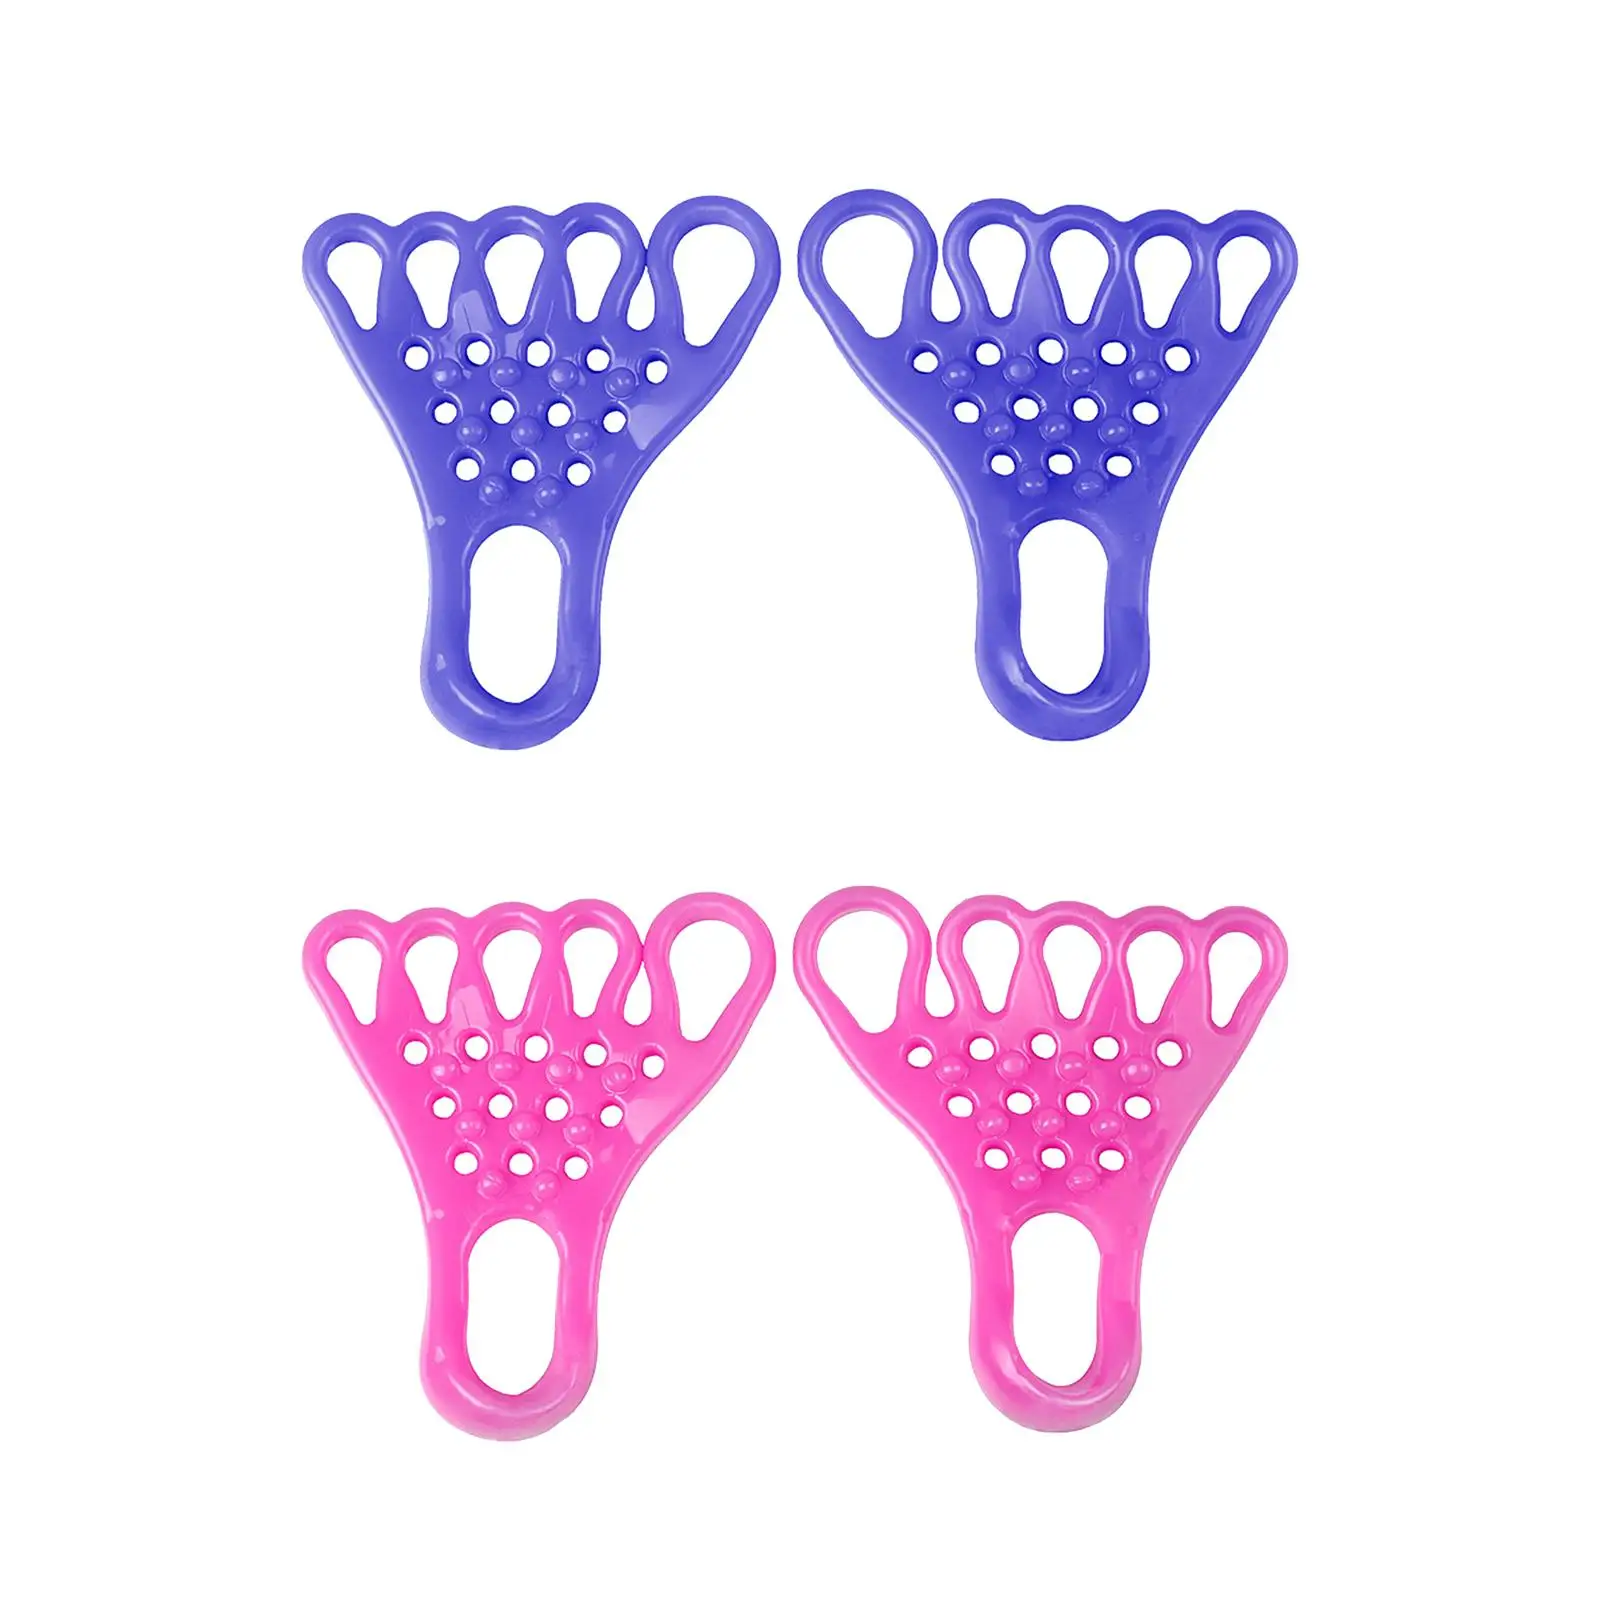 Toe Straightener Toe Stretcher Stretcher Breathable Foot Care Toe Spacer for Hallux Valgus Big Toe Yoga Bunions Overlapping Toes